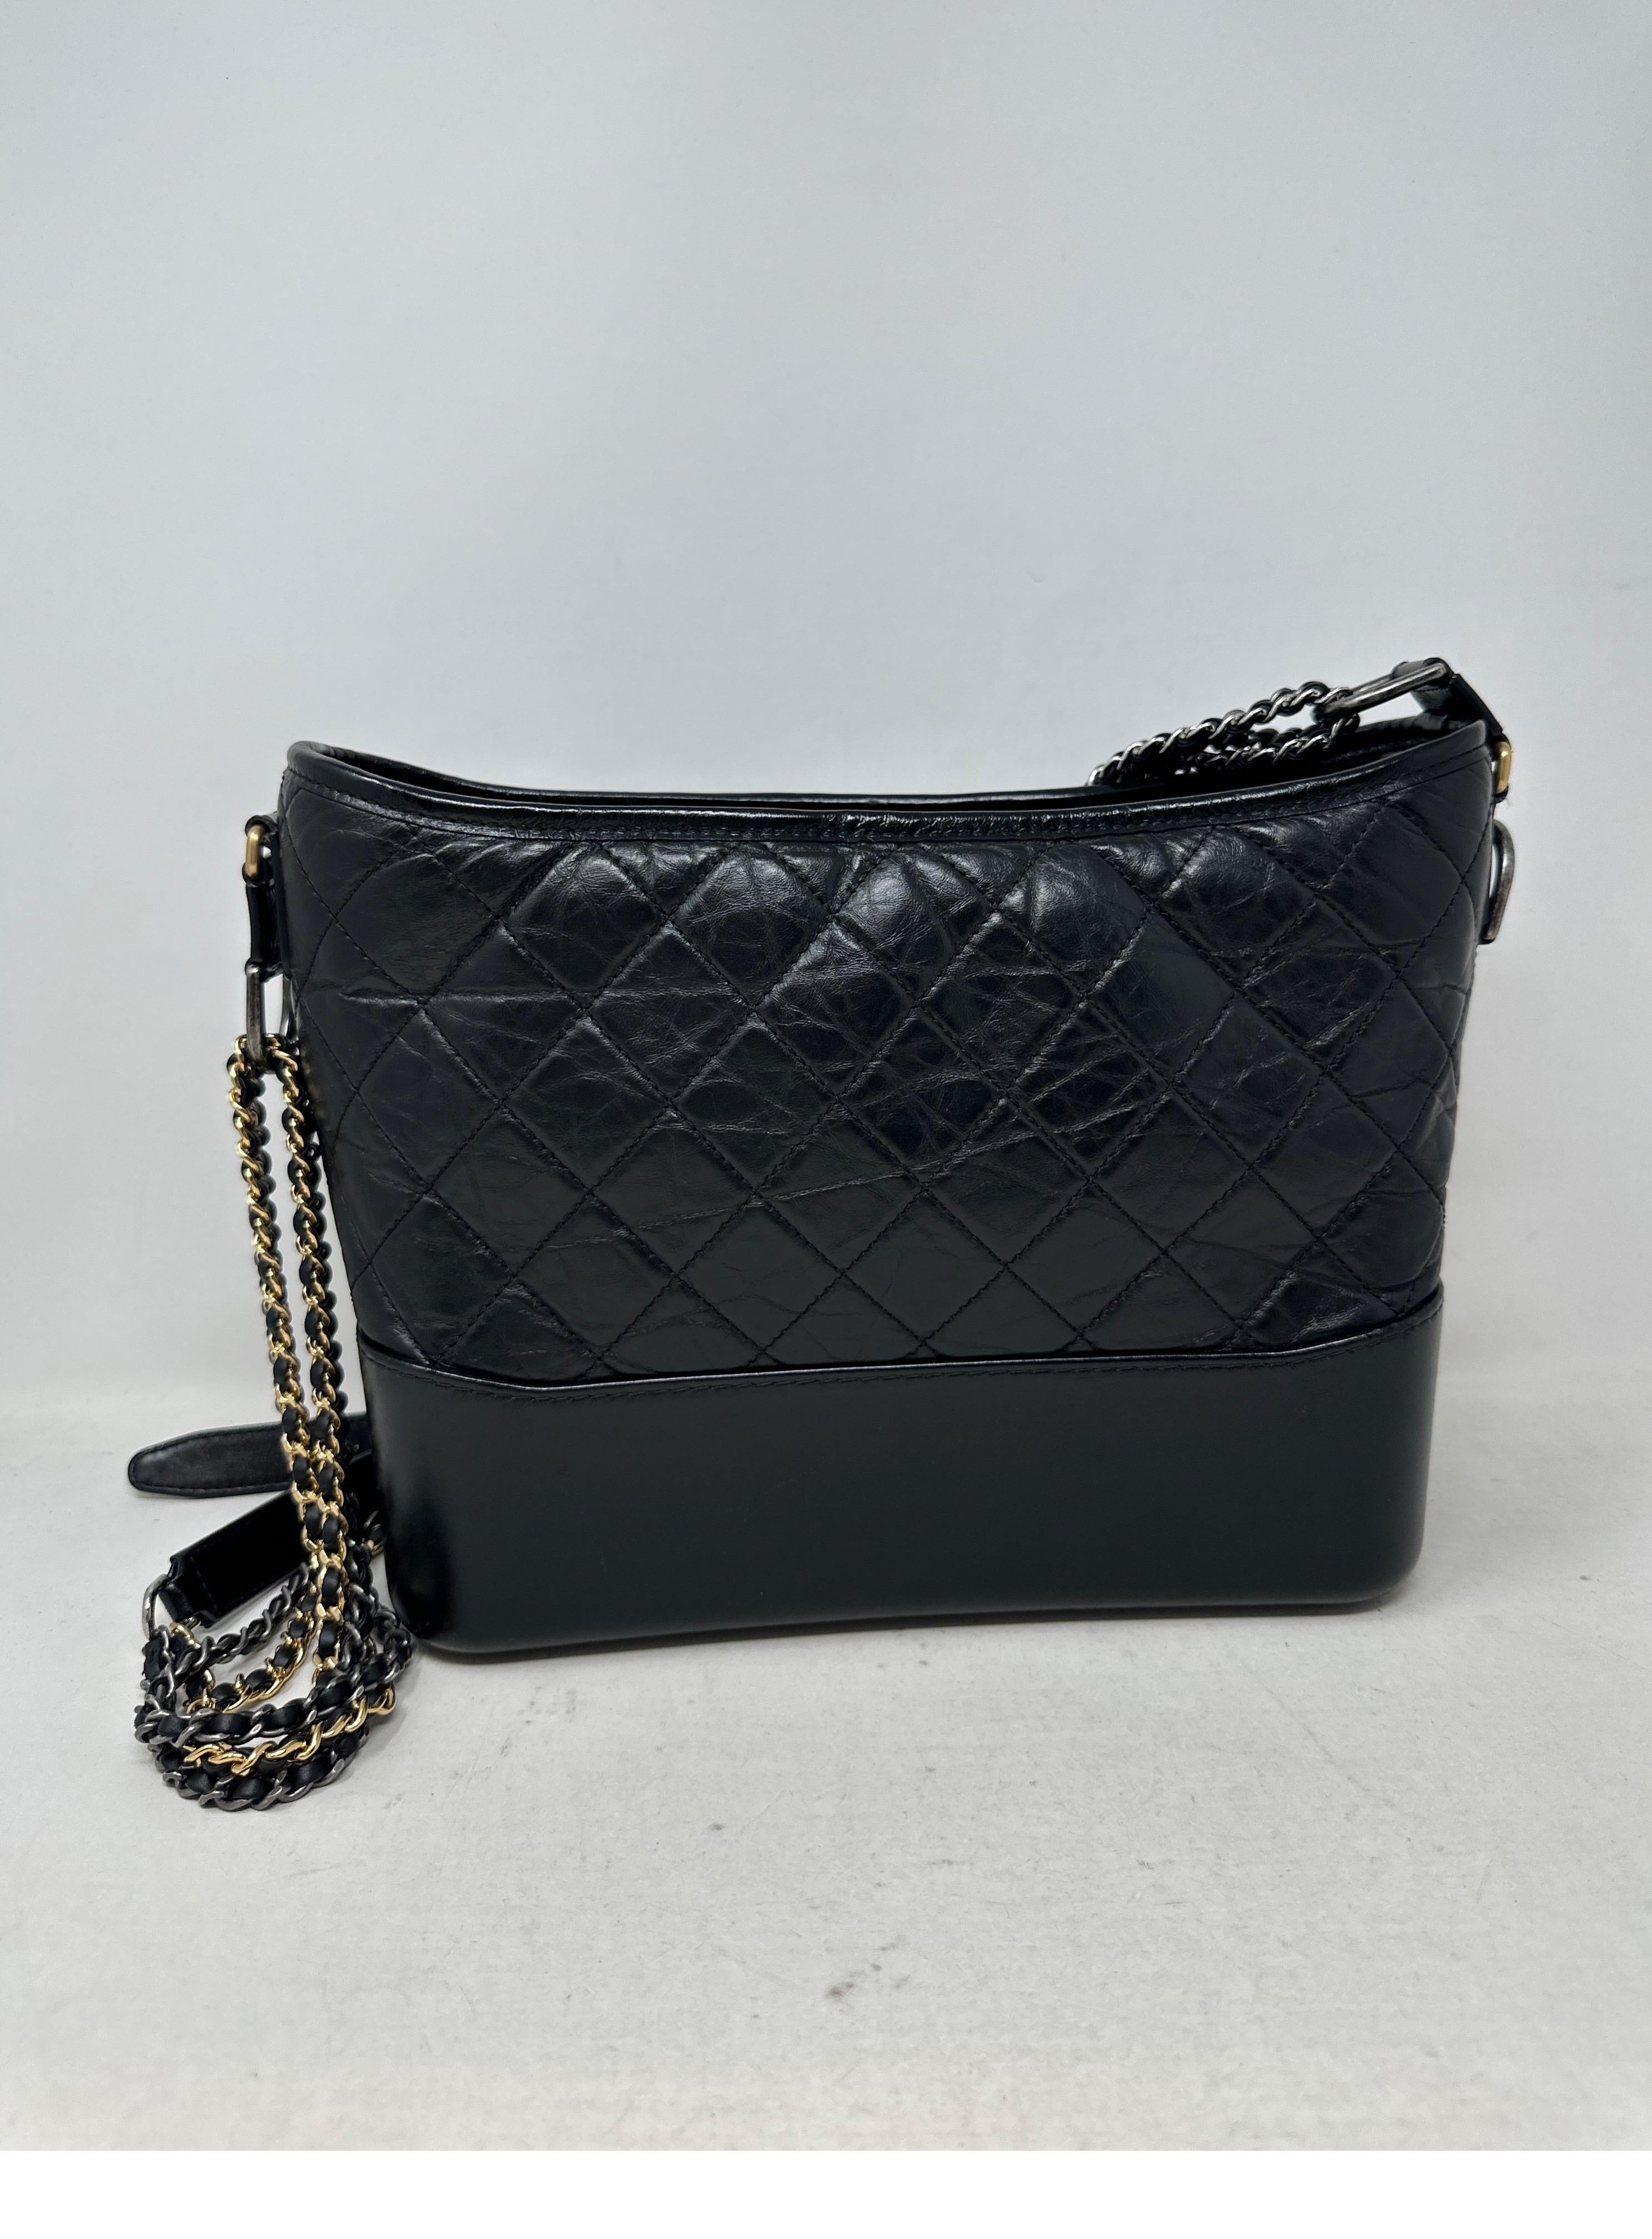 Chanel Black Gabrielle Medium Bag. Multi-functional ways to wear this classic bag. Two-tone gold and silver hardware makes it easy to wear with different outfits. Very good condition. Leather looks great. Nice casual and understated look. Interior